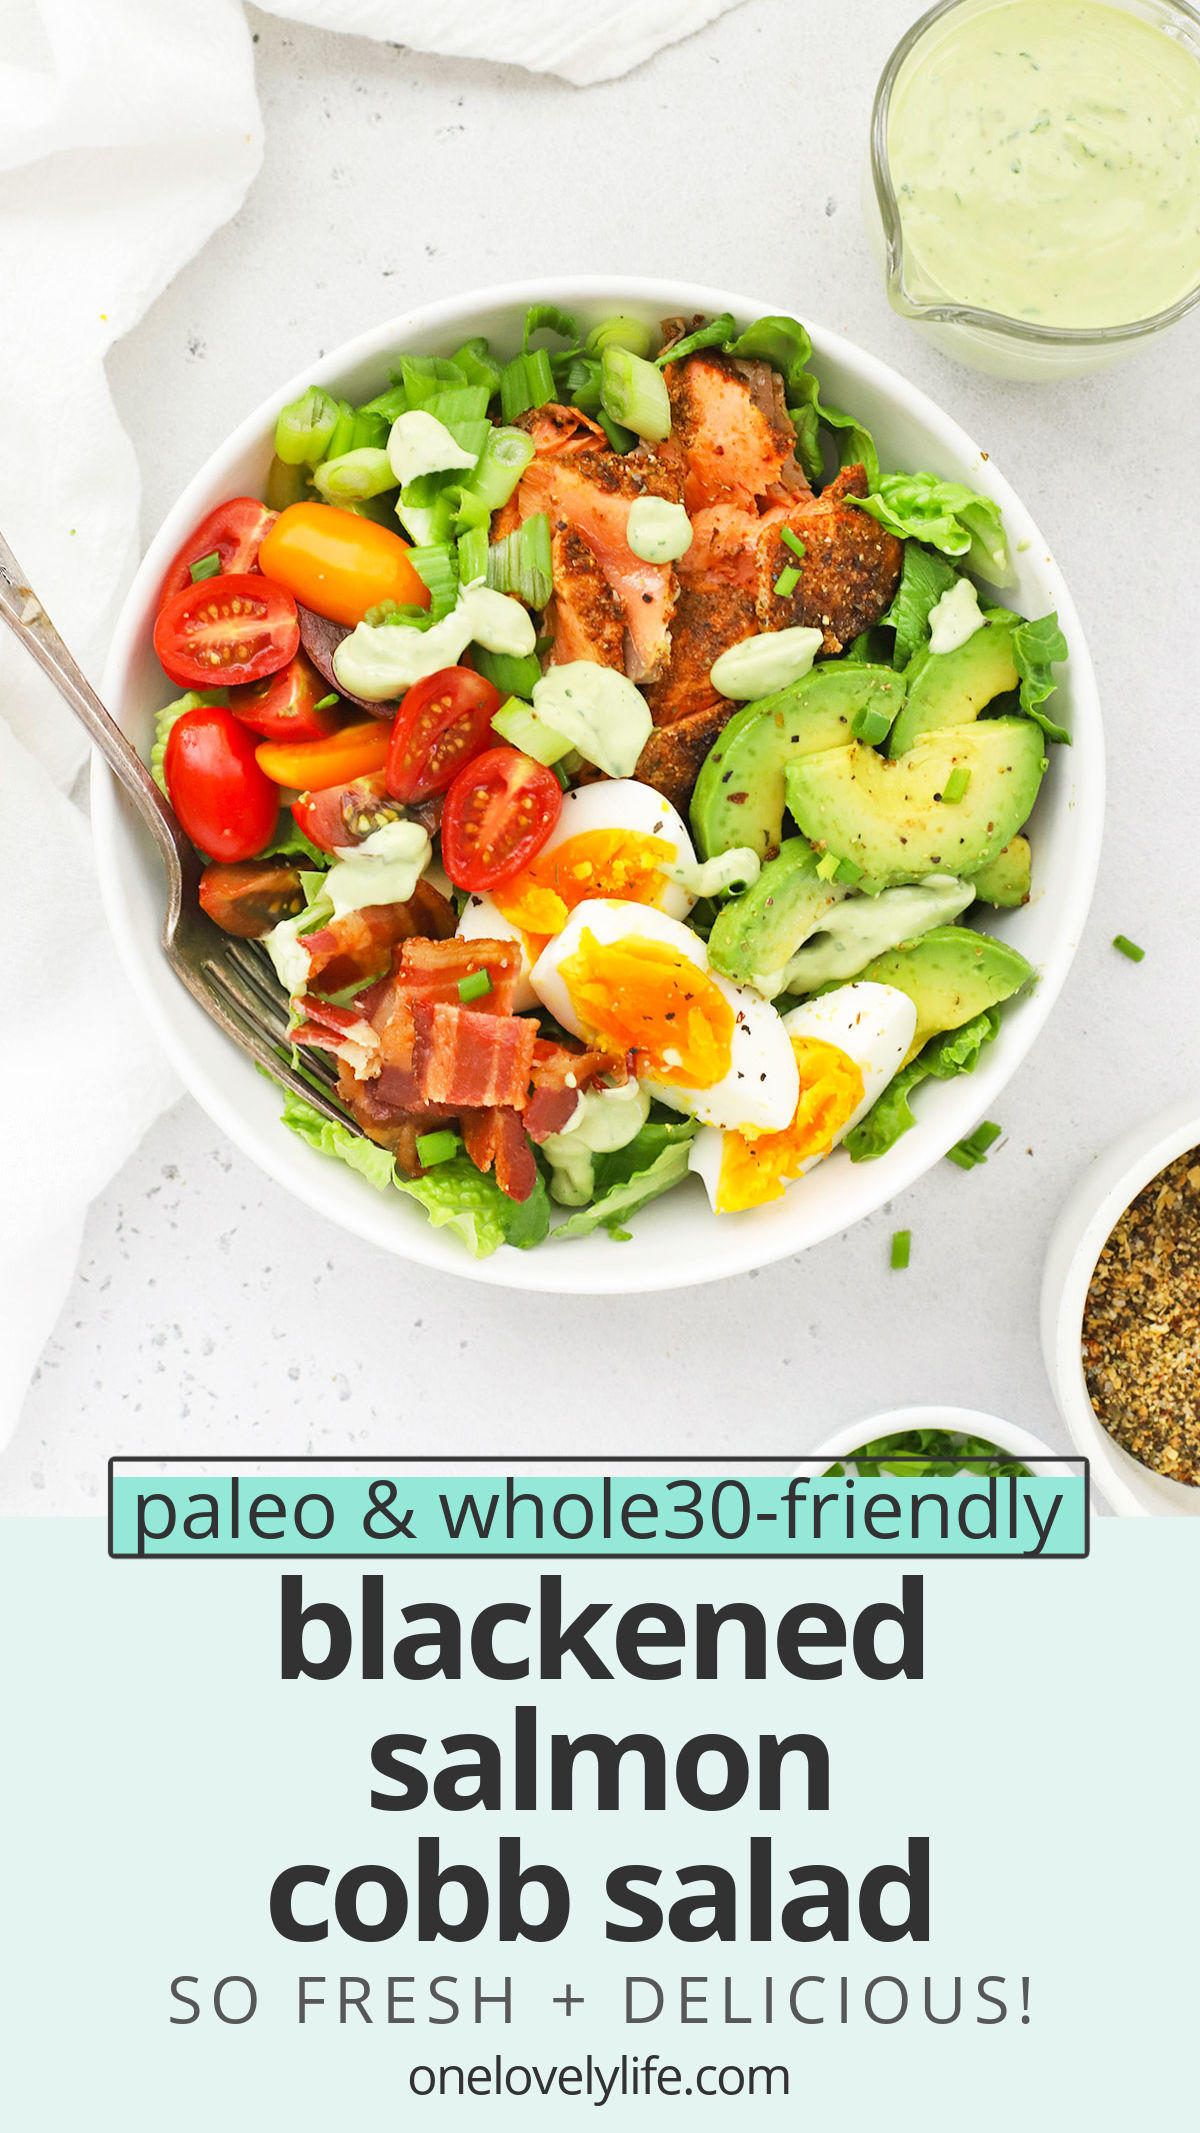 Blackened Salmon Cobb Salad - This salmon Cobb salad full of colorful veggies and finished with a creamy avocado green goddess dressing we can't get enough of! (Paleo, Whole30-Friendly) // Salmon Salad // Blackened Salmon Recipe // Salmon Cobb Recipe // Healthy Dinner // dinner salad // summer salad // green goddess salad // the best cobb salad // blackened cobb salad